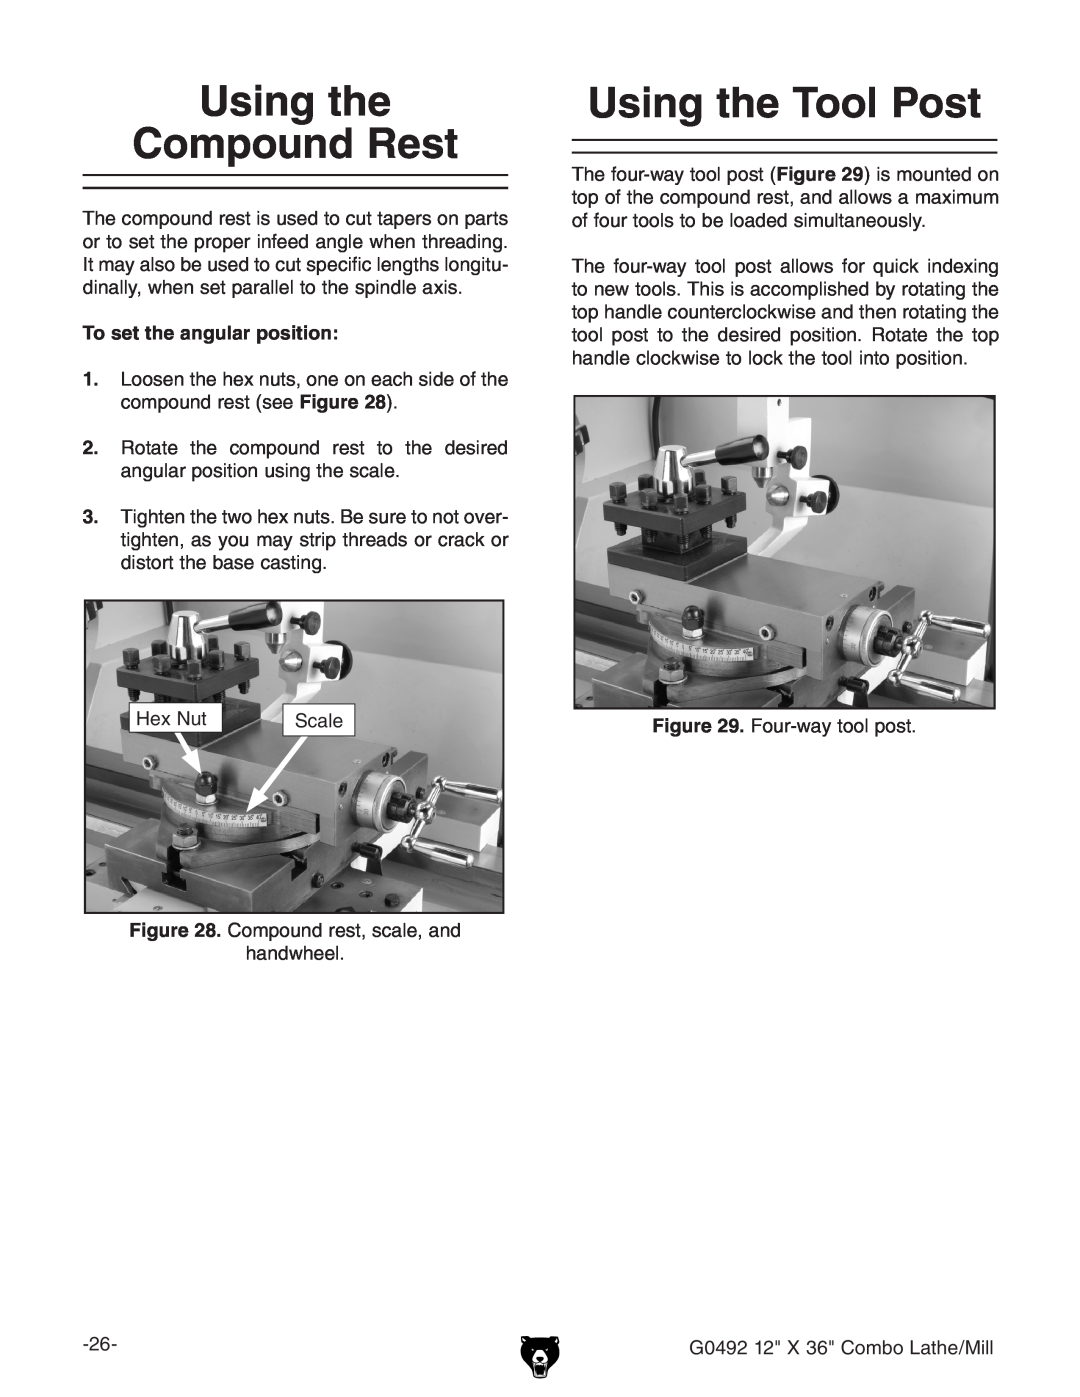 Grizzly G0492 owner manual Using the Compound Rest, Using the Tool Post, To set the angular position 